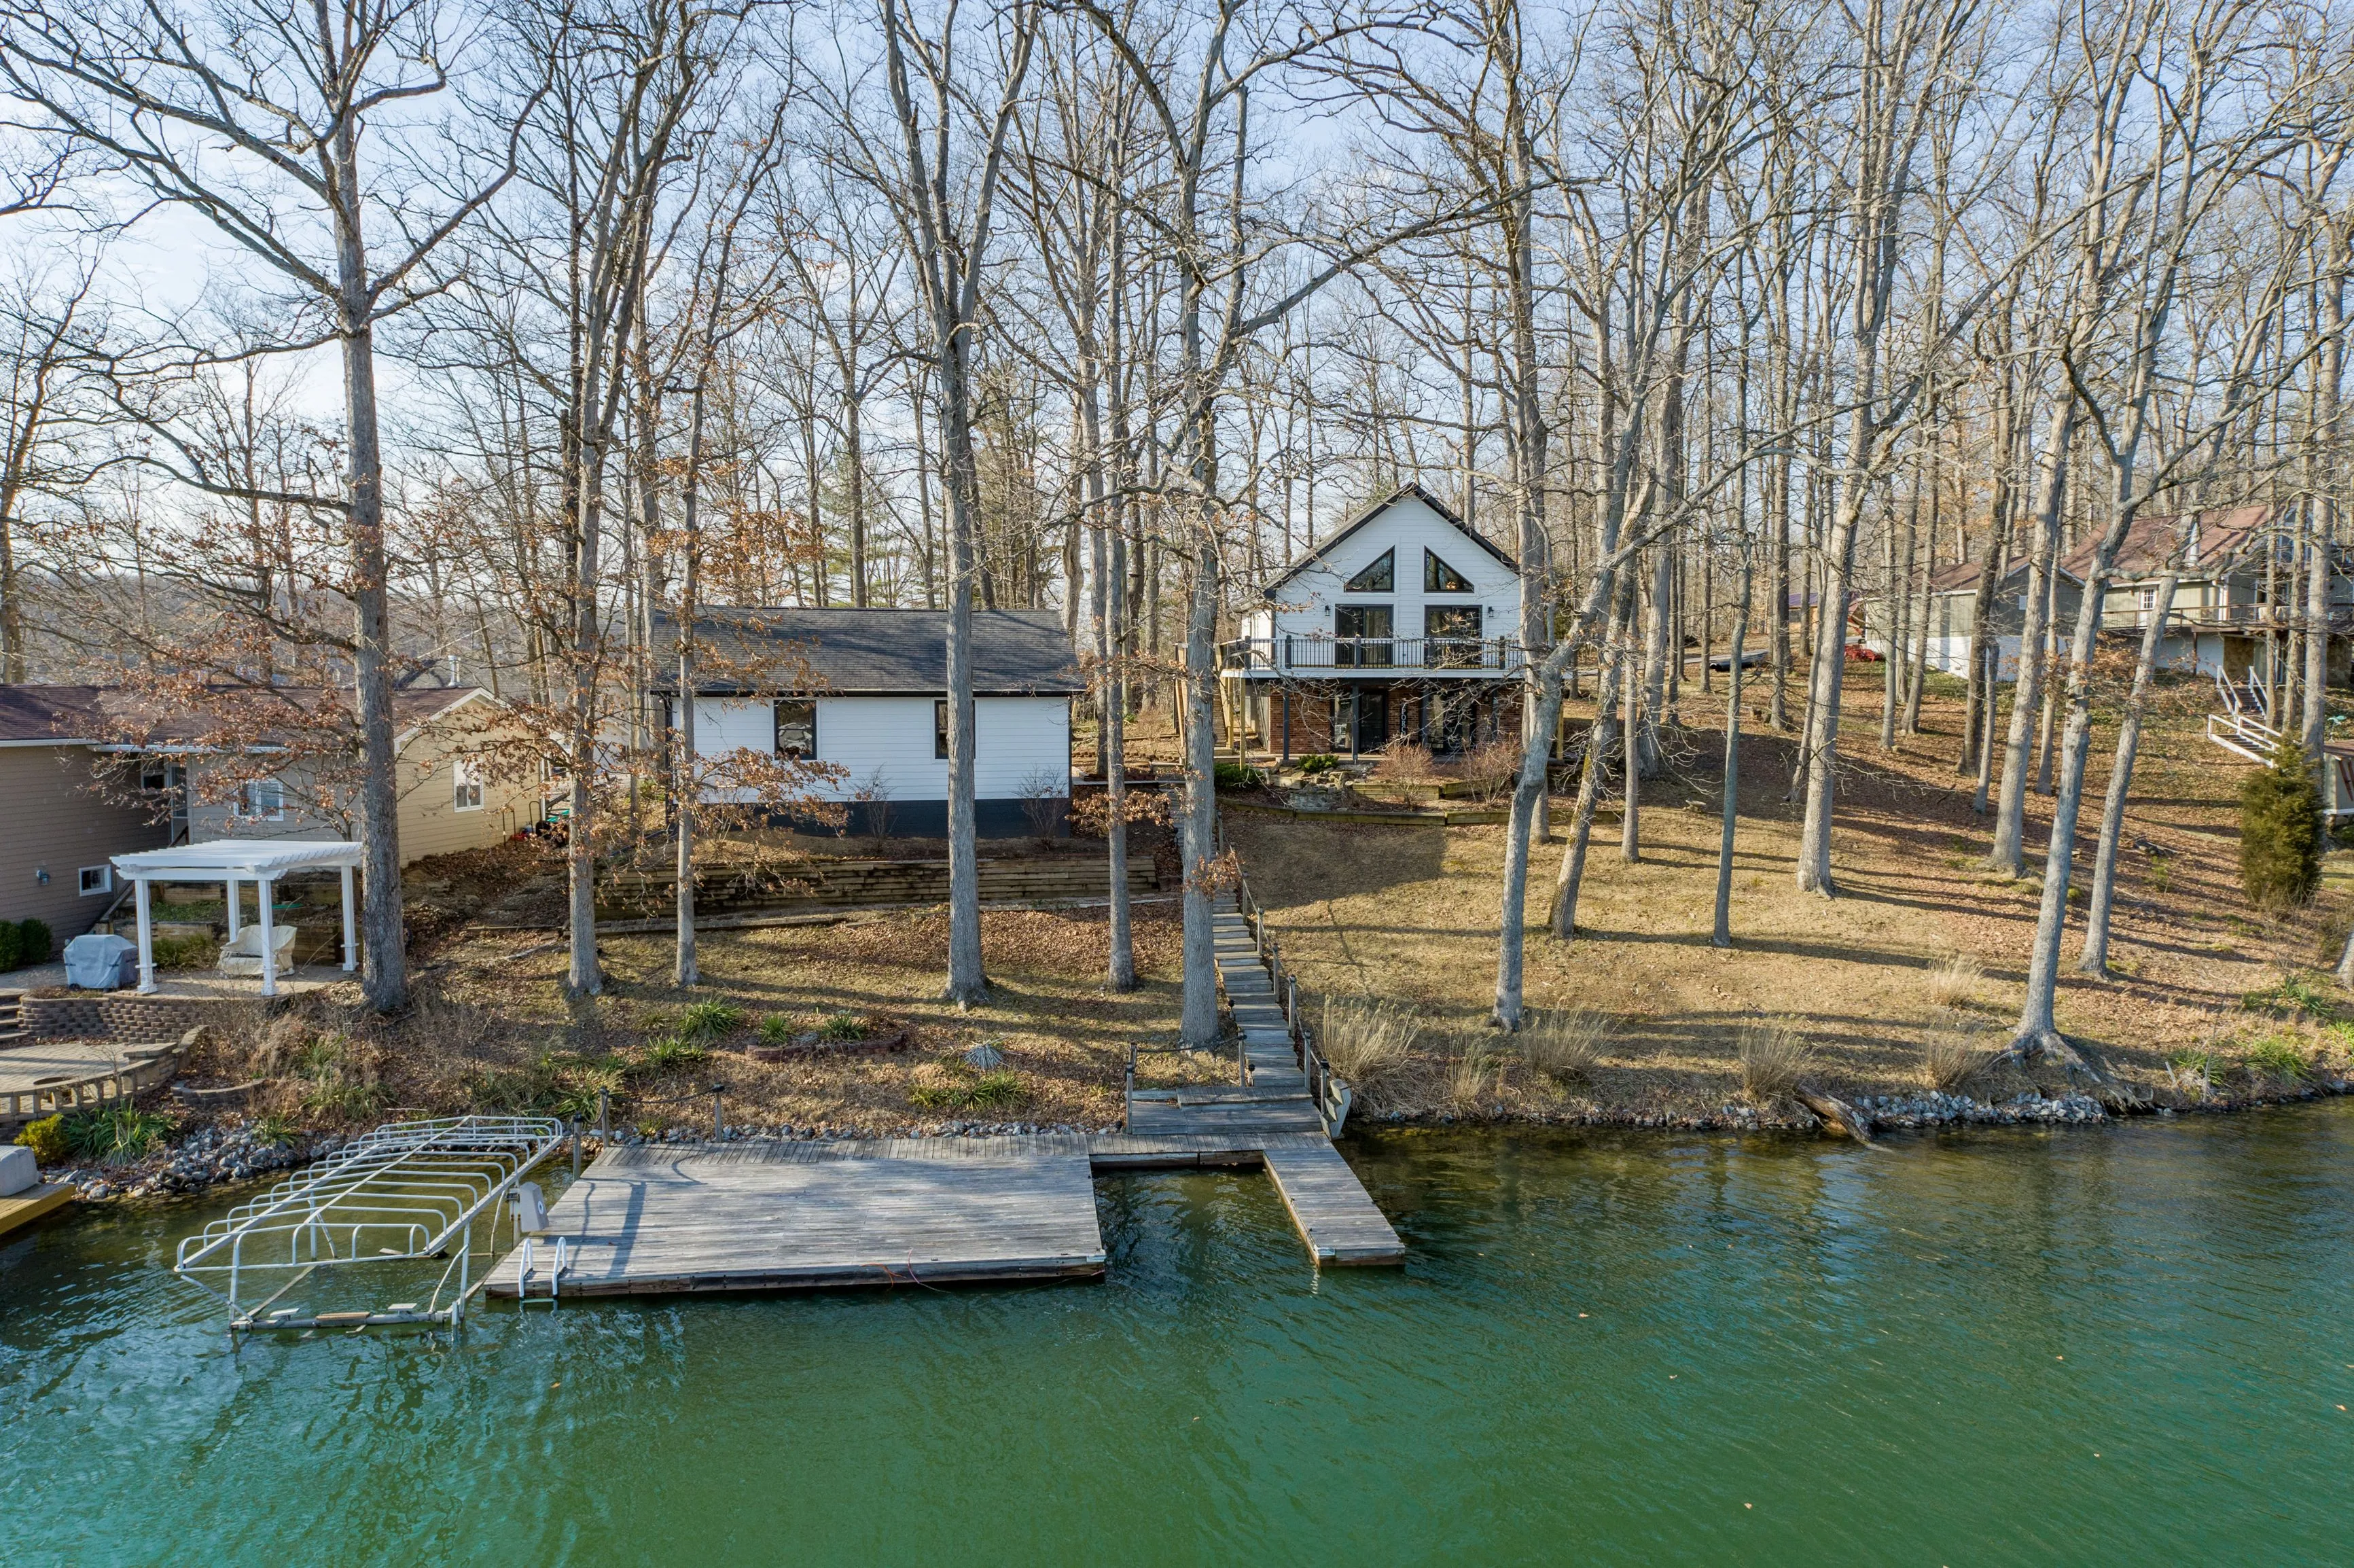 Lakeside house surrounded by leafless trees with a dock and boat slip in the foreground.